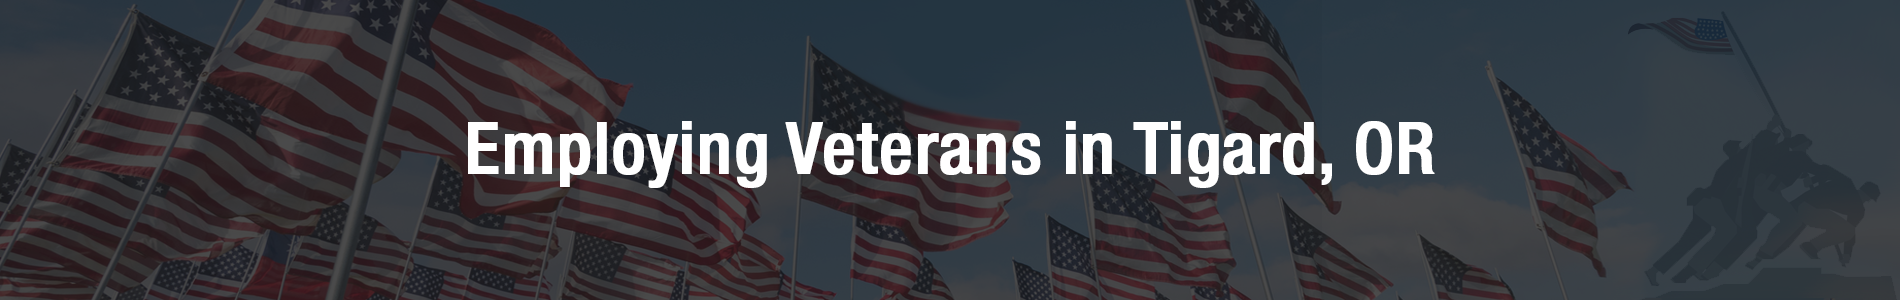 Employing Veterans in Tigard, OR